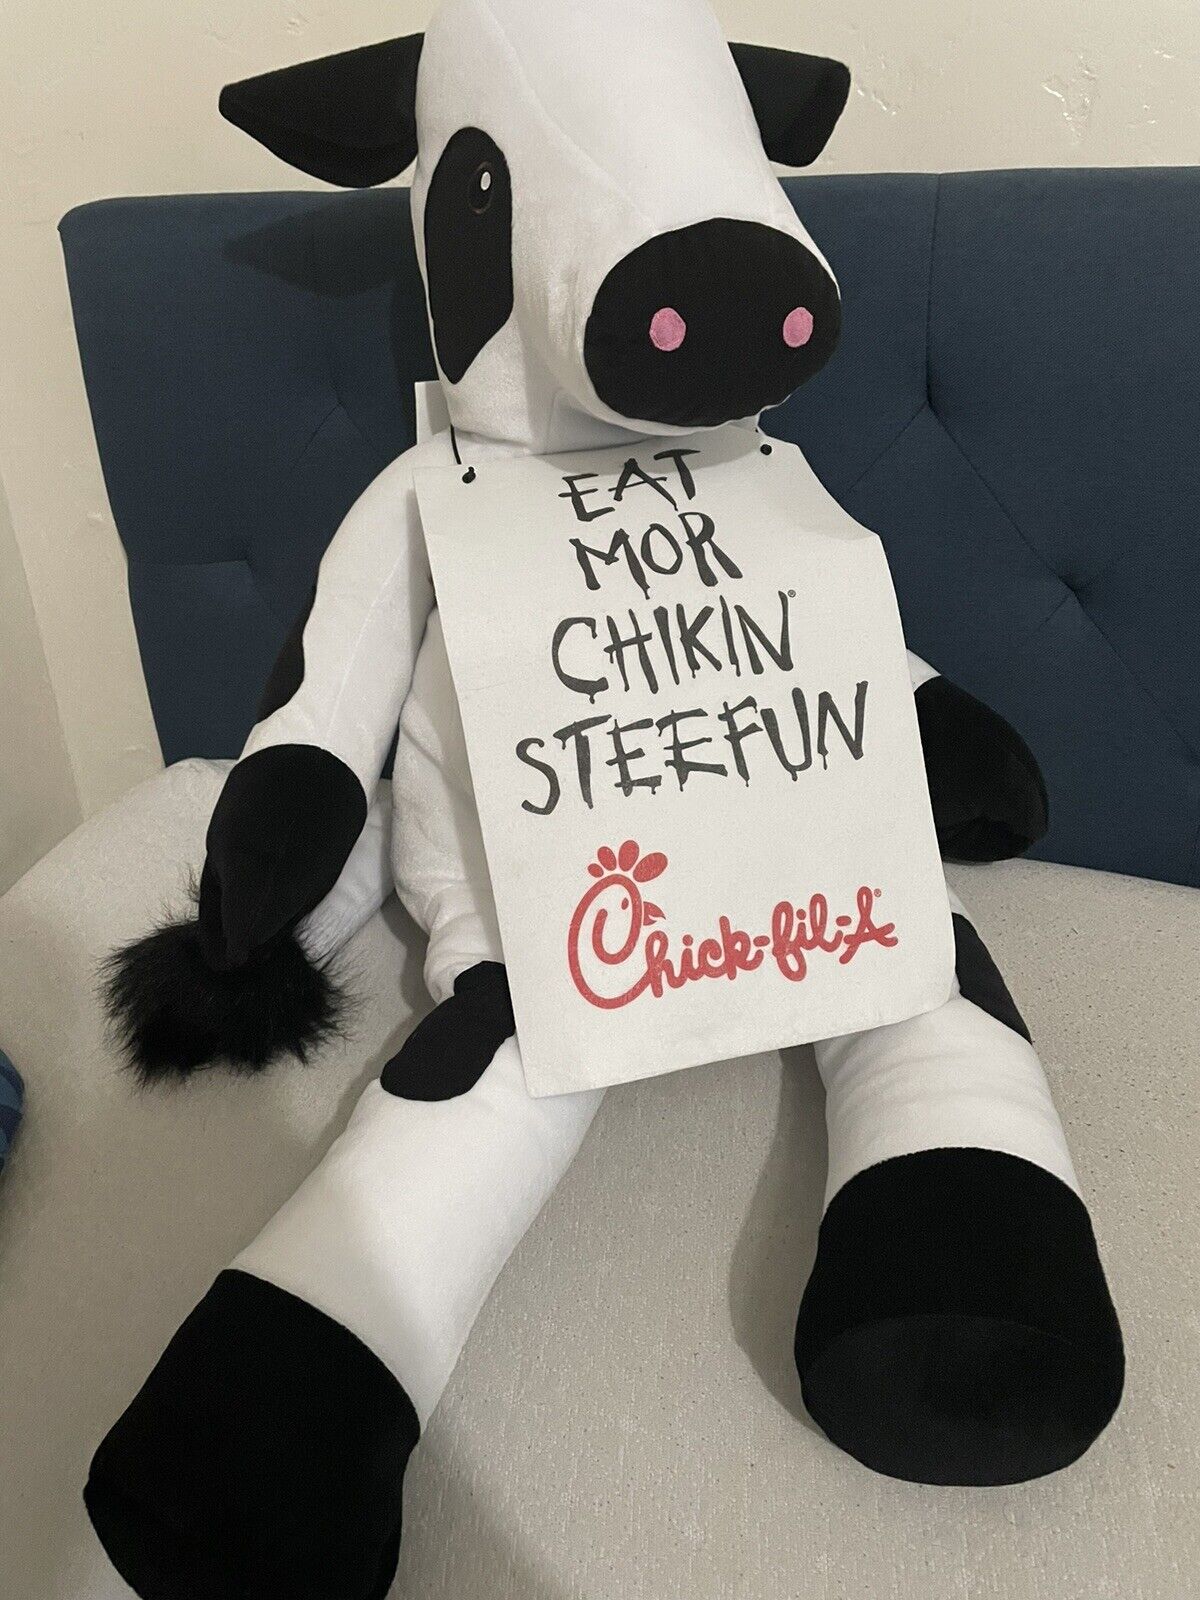 Chick-fil-a Jumbo BIG Large 36 Inch Plush Eat More Chicken Cow Store Display